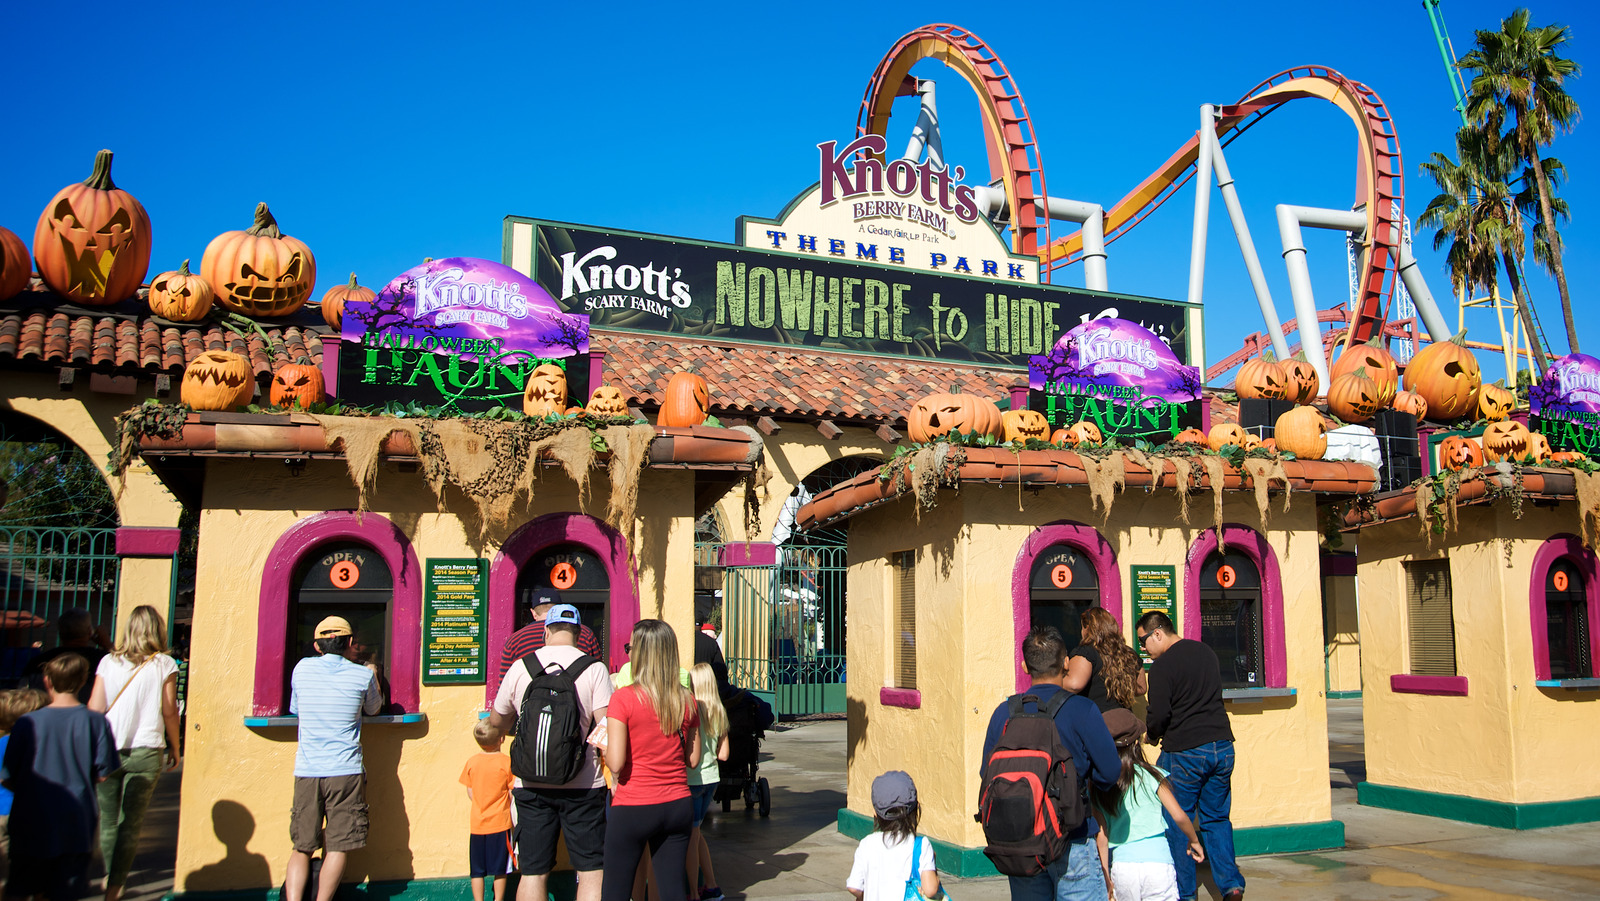 Knott's Berry Farm's Most Unsettling Halloween Snack